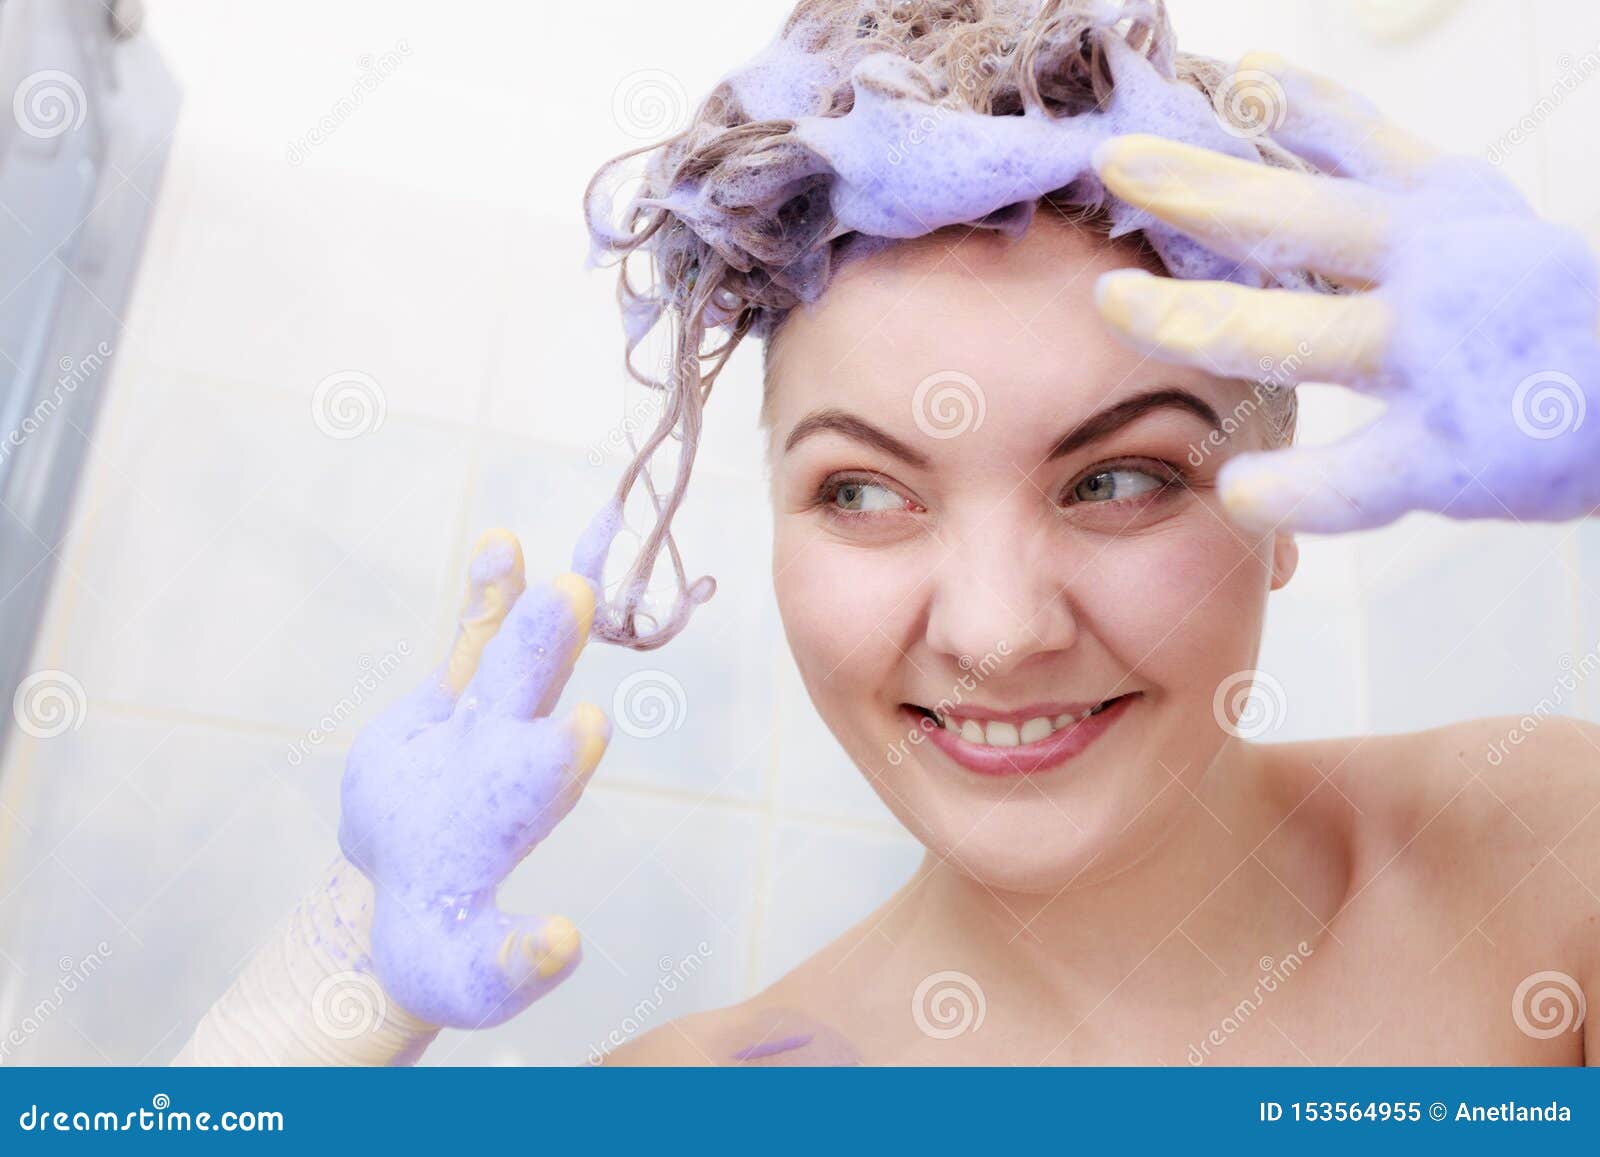 Woman with Toner on Her Hair Stock - Image of shampooing, toning: 153564955